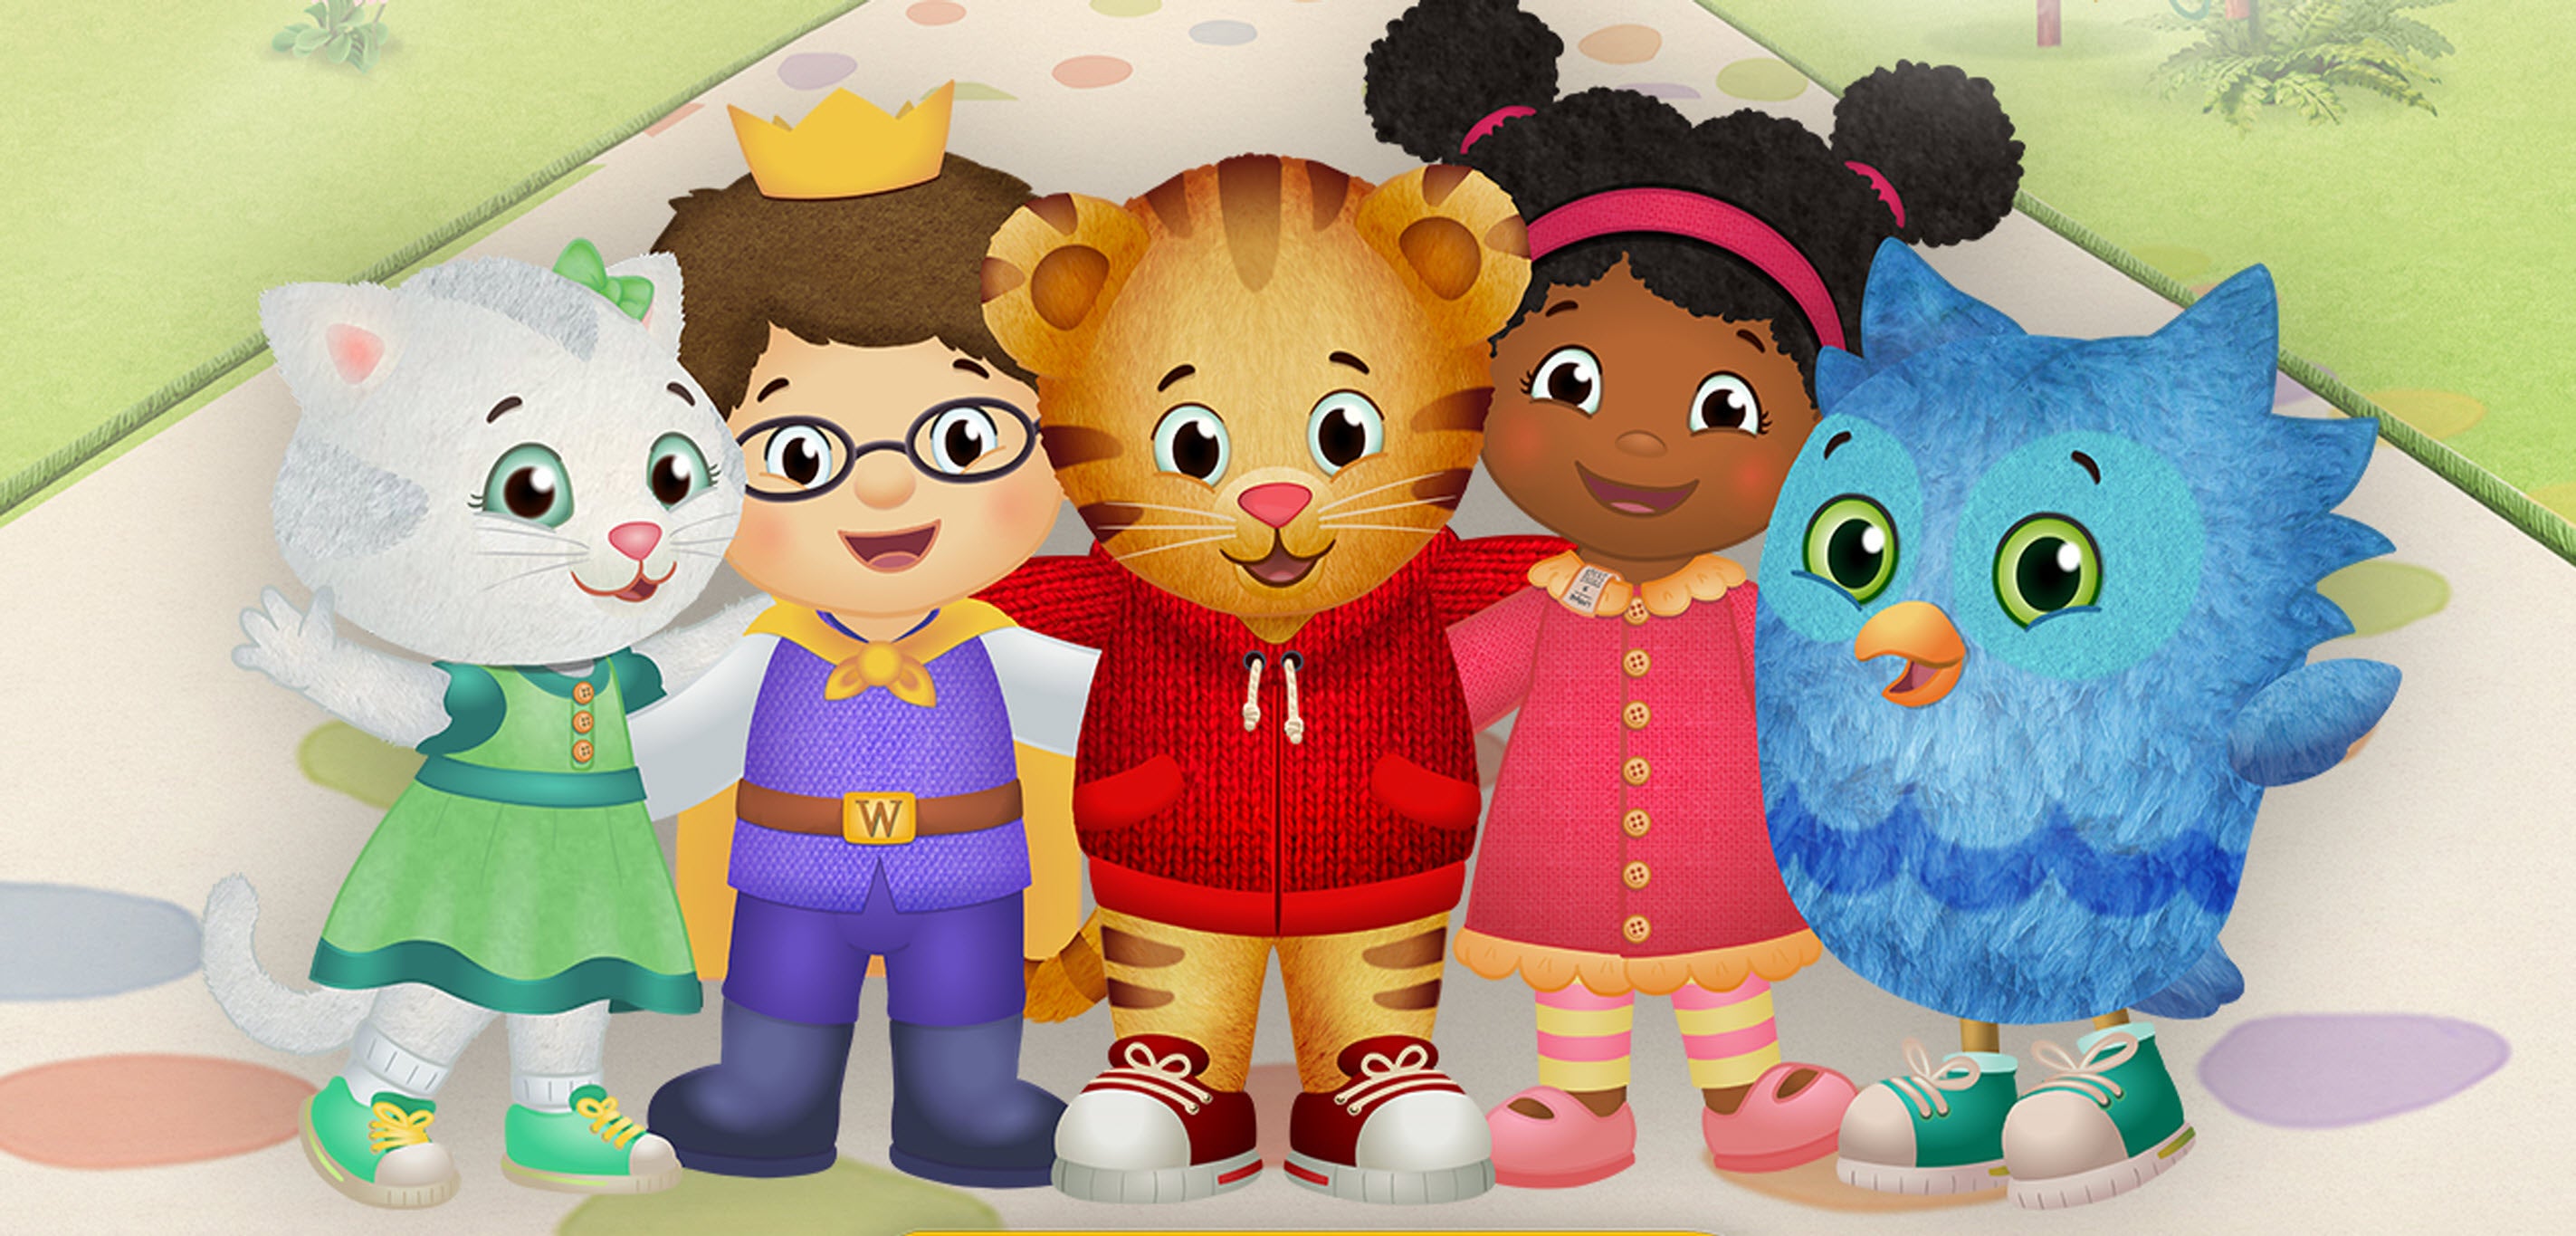 Daniel Tiger's Neighborhood Live! - King For A Day in Seattle promo photo for Special  presale offer code